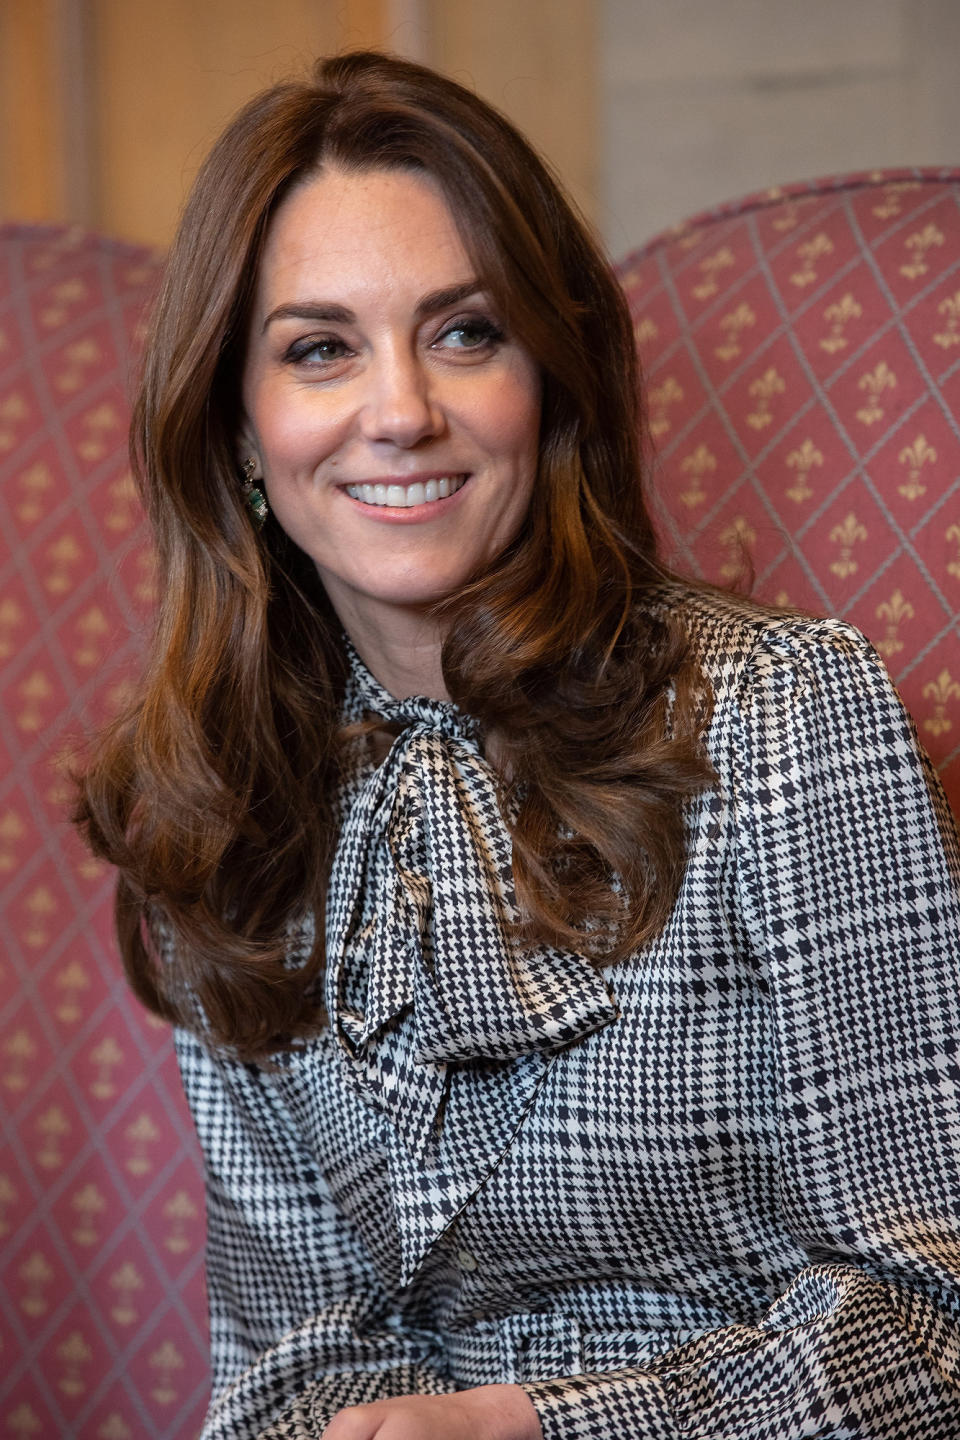 Kate Middleton wore a similar design for a royal engagement to Bradford in January (Getty Images)